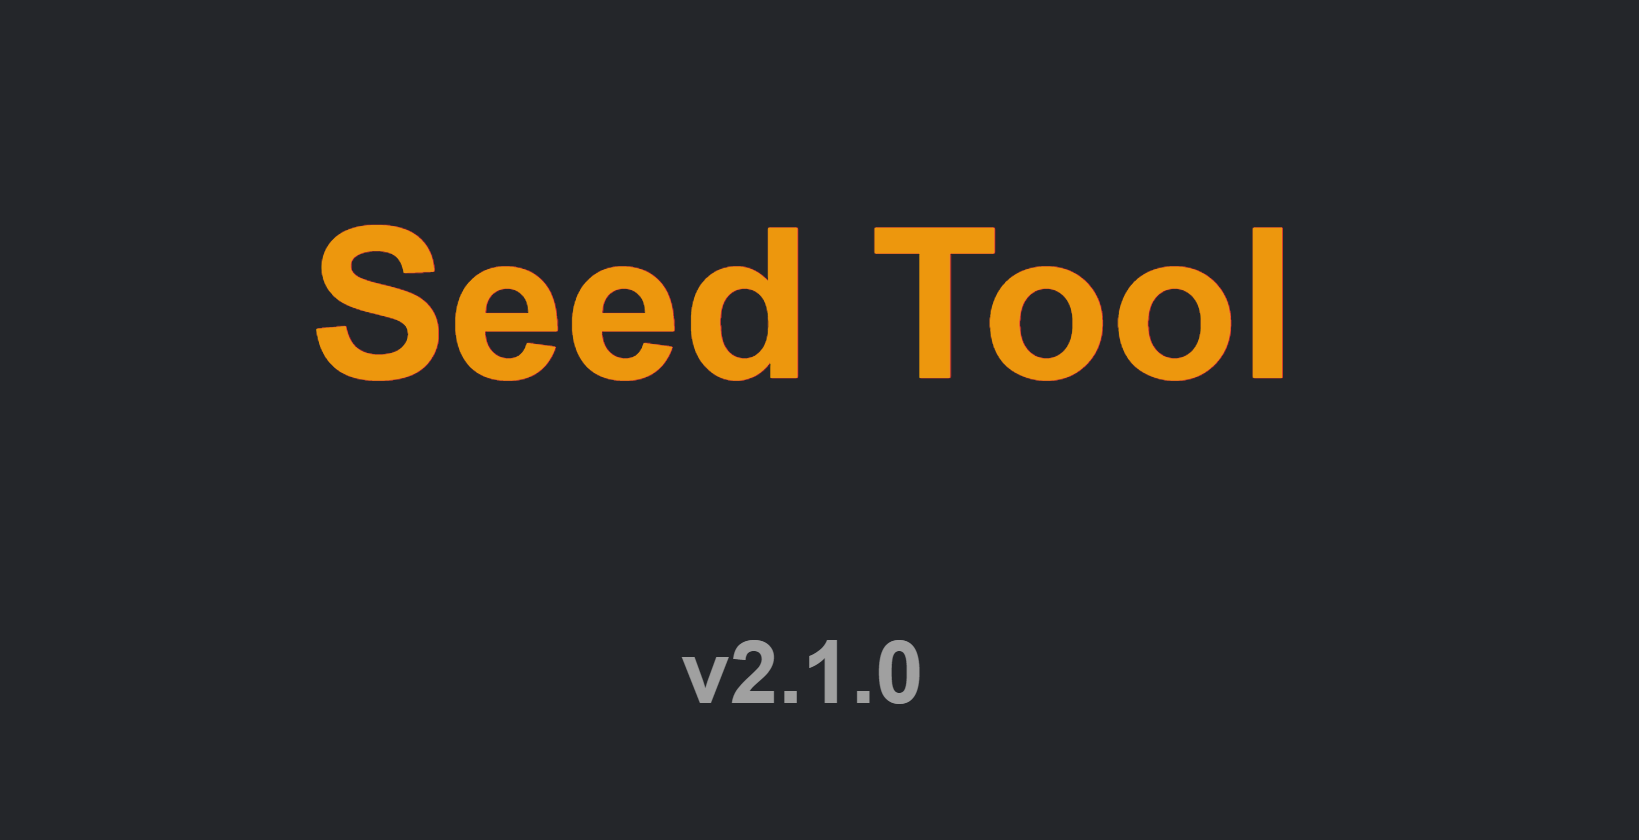 Seed Tool v2.1.0: Updated Styling and Bug Fixes